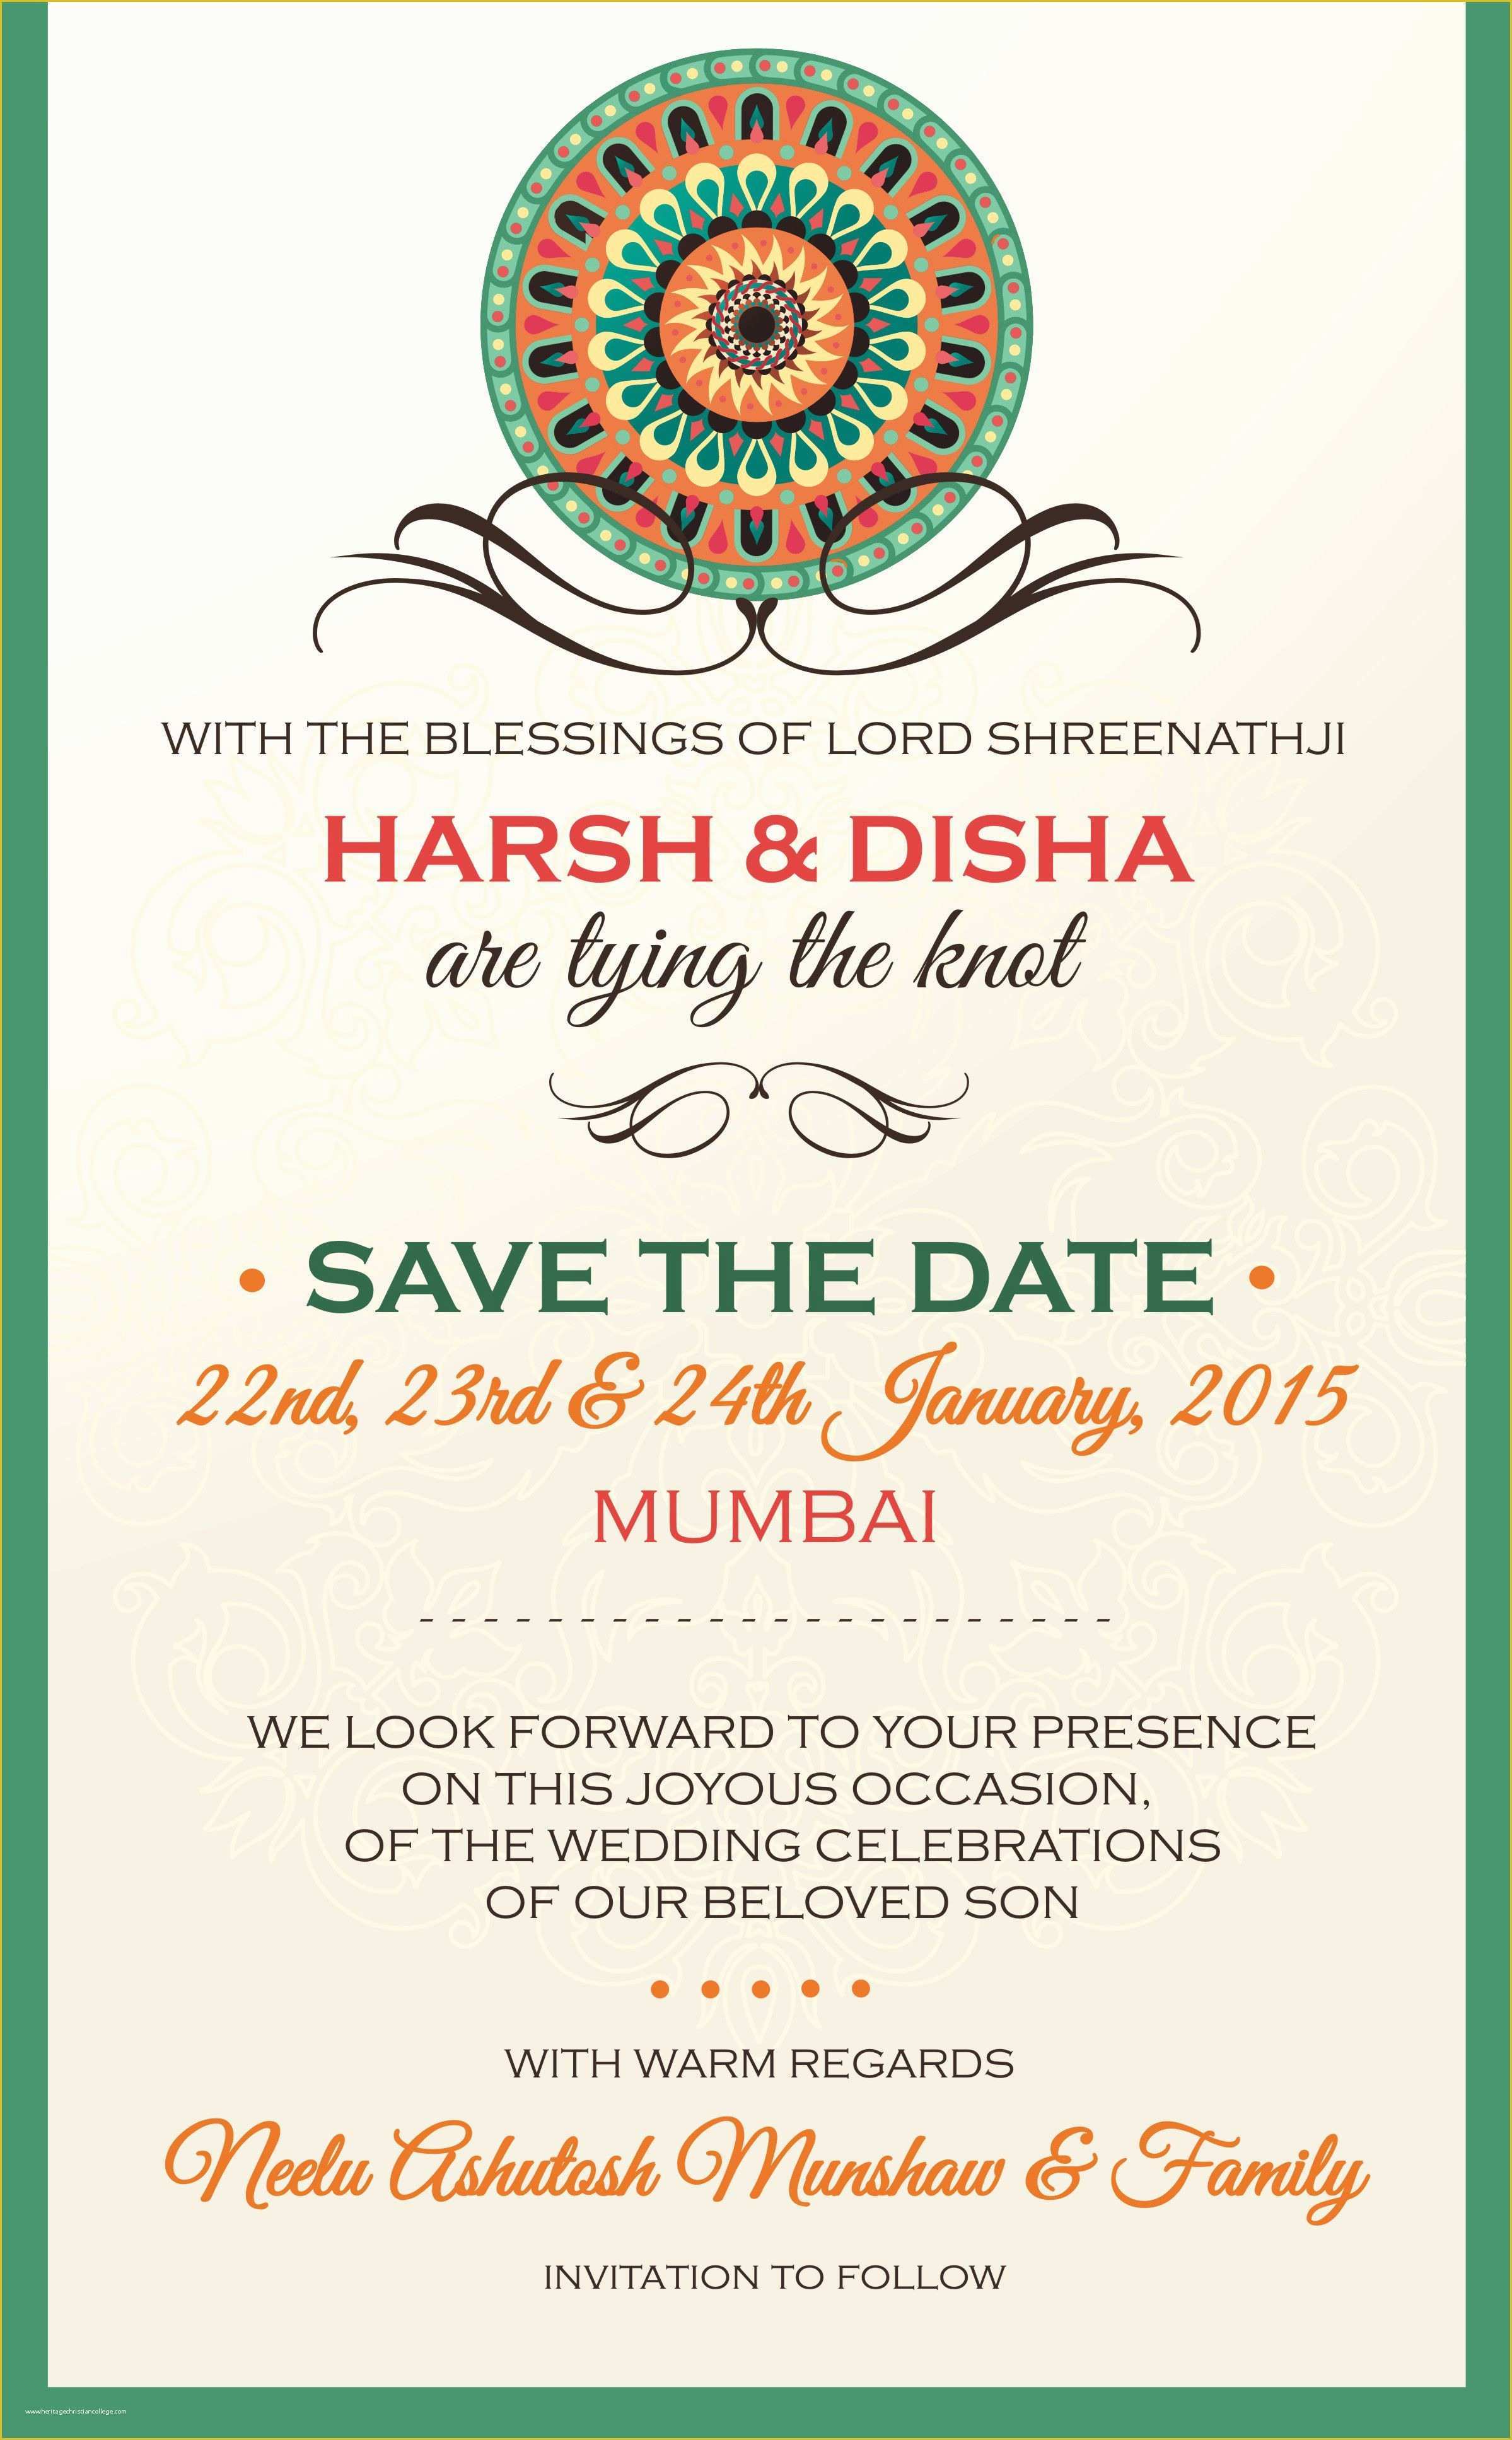 Save the Date Indian Wedding Templates Free Of Wedding Invitations Cards Indian Wedding Cards Invites